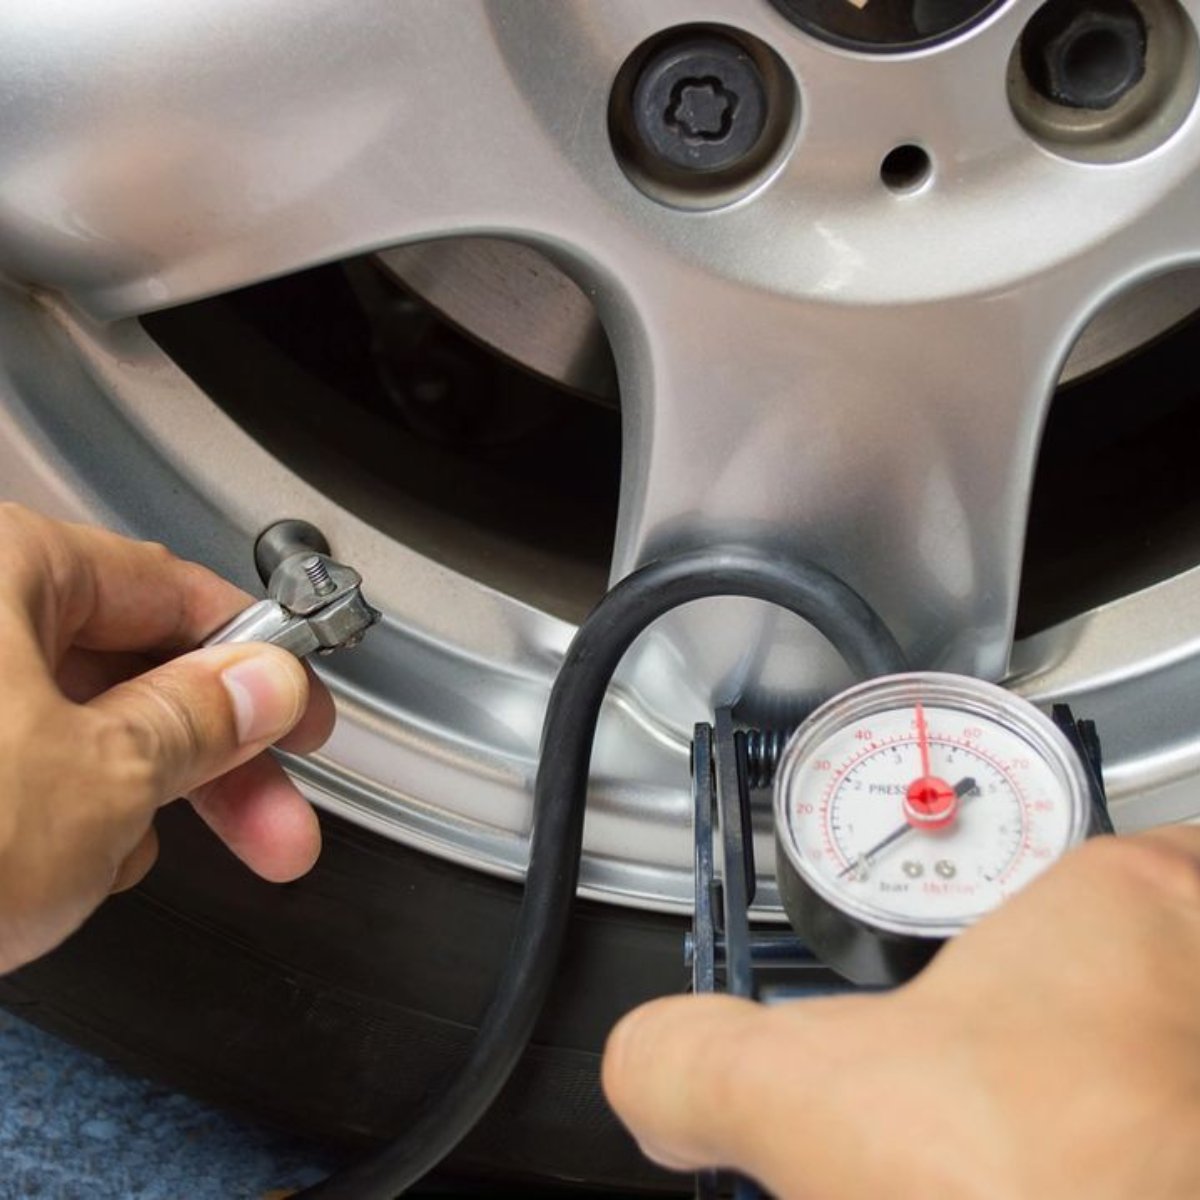 Tired of pulling up to the air pump week after week? It's possible your tire could have a leak. Be sure to take it in to get it patched up or replaced before it's too late!